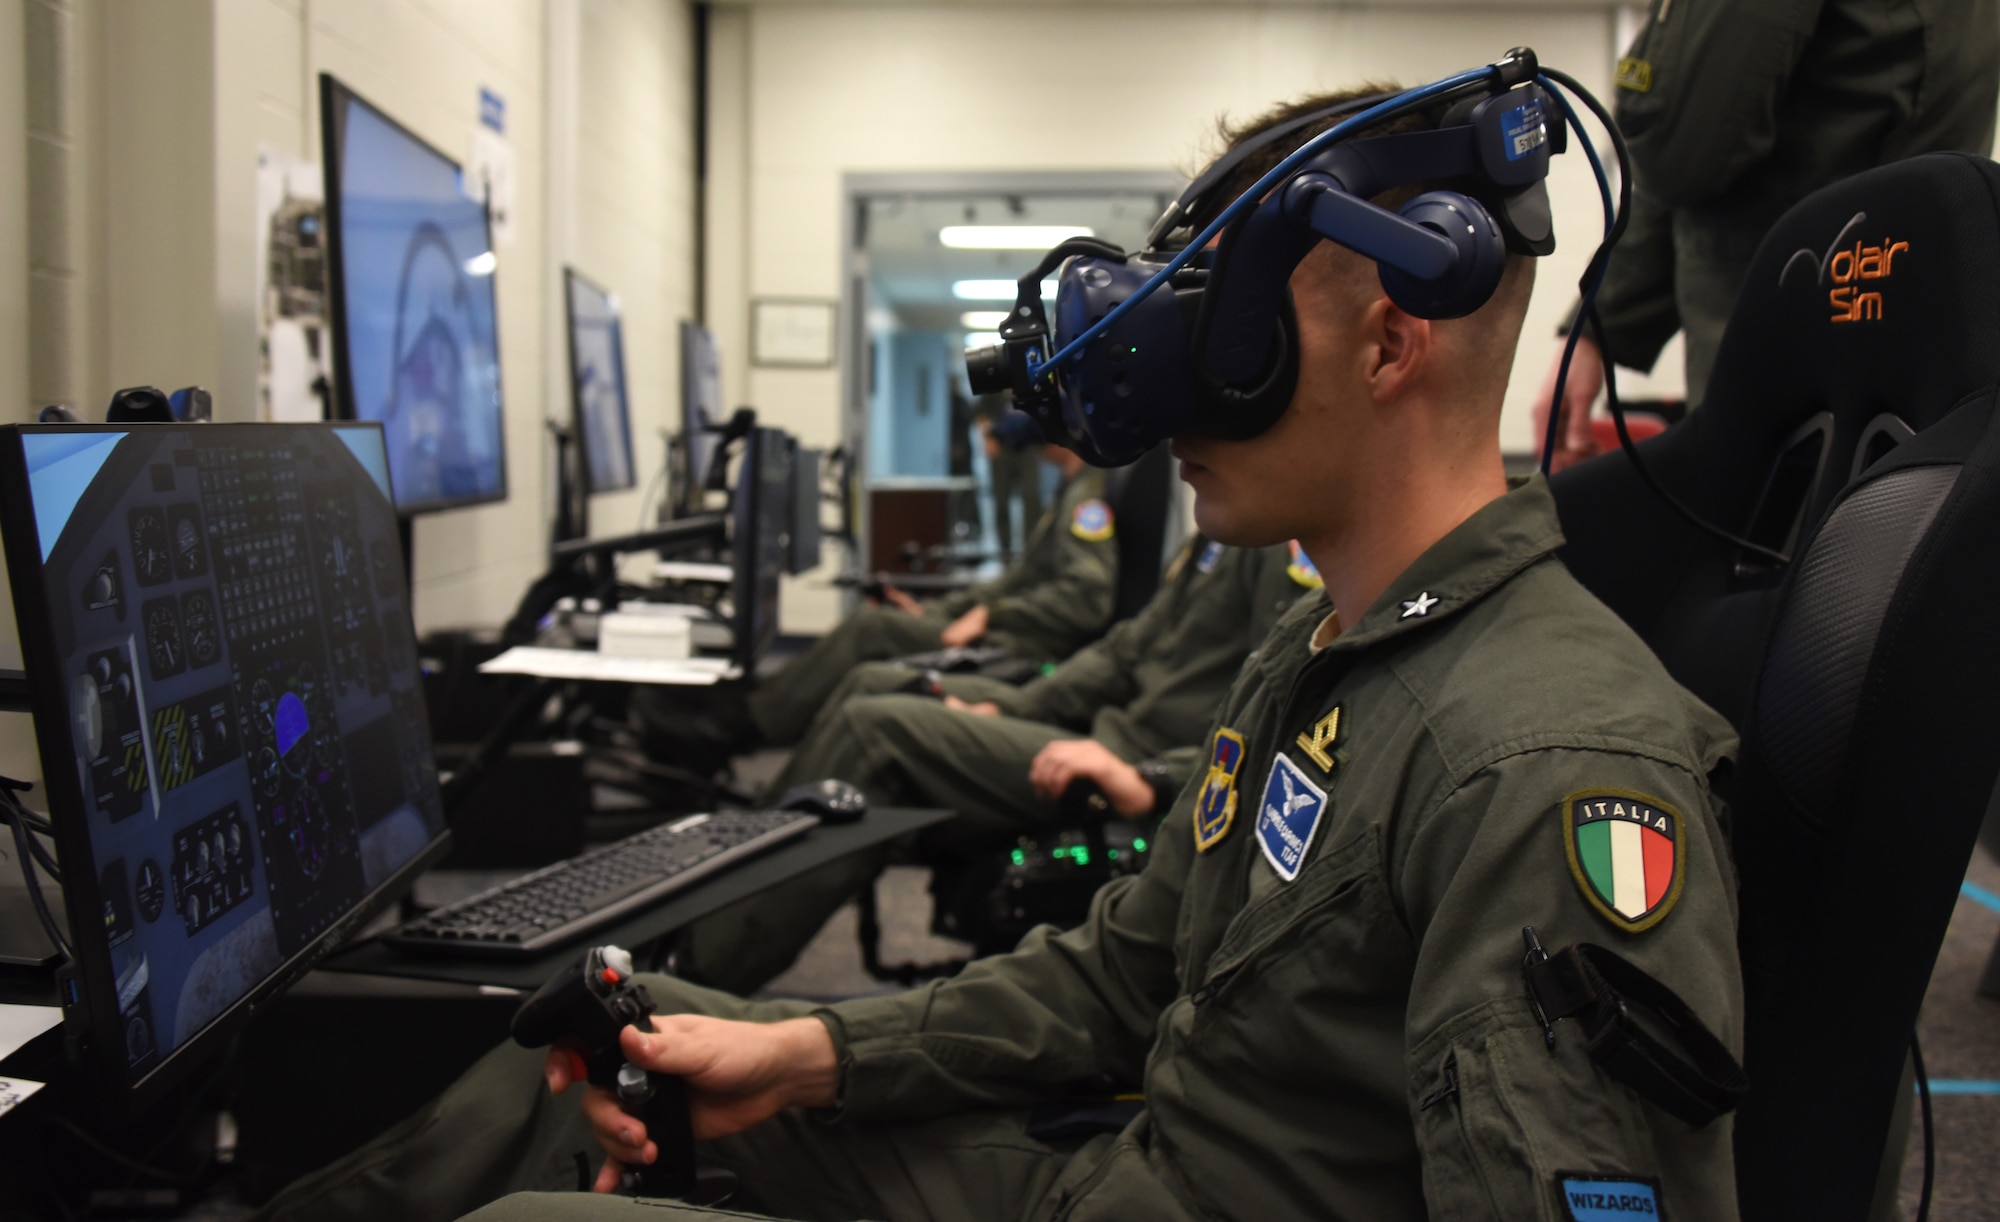 Student pilot participates in mixed reality